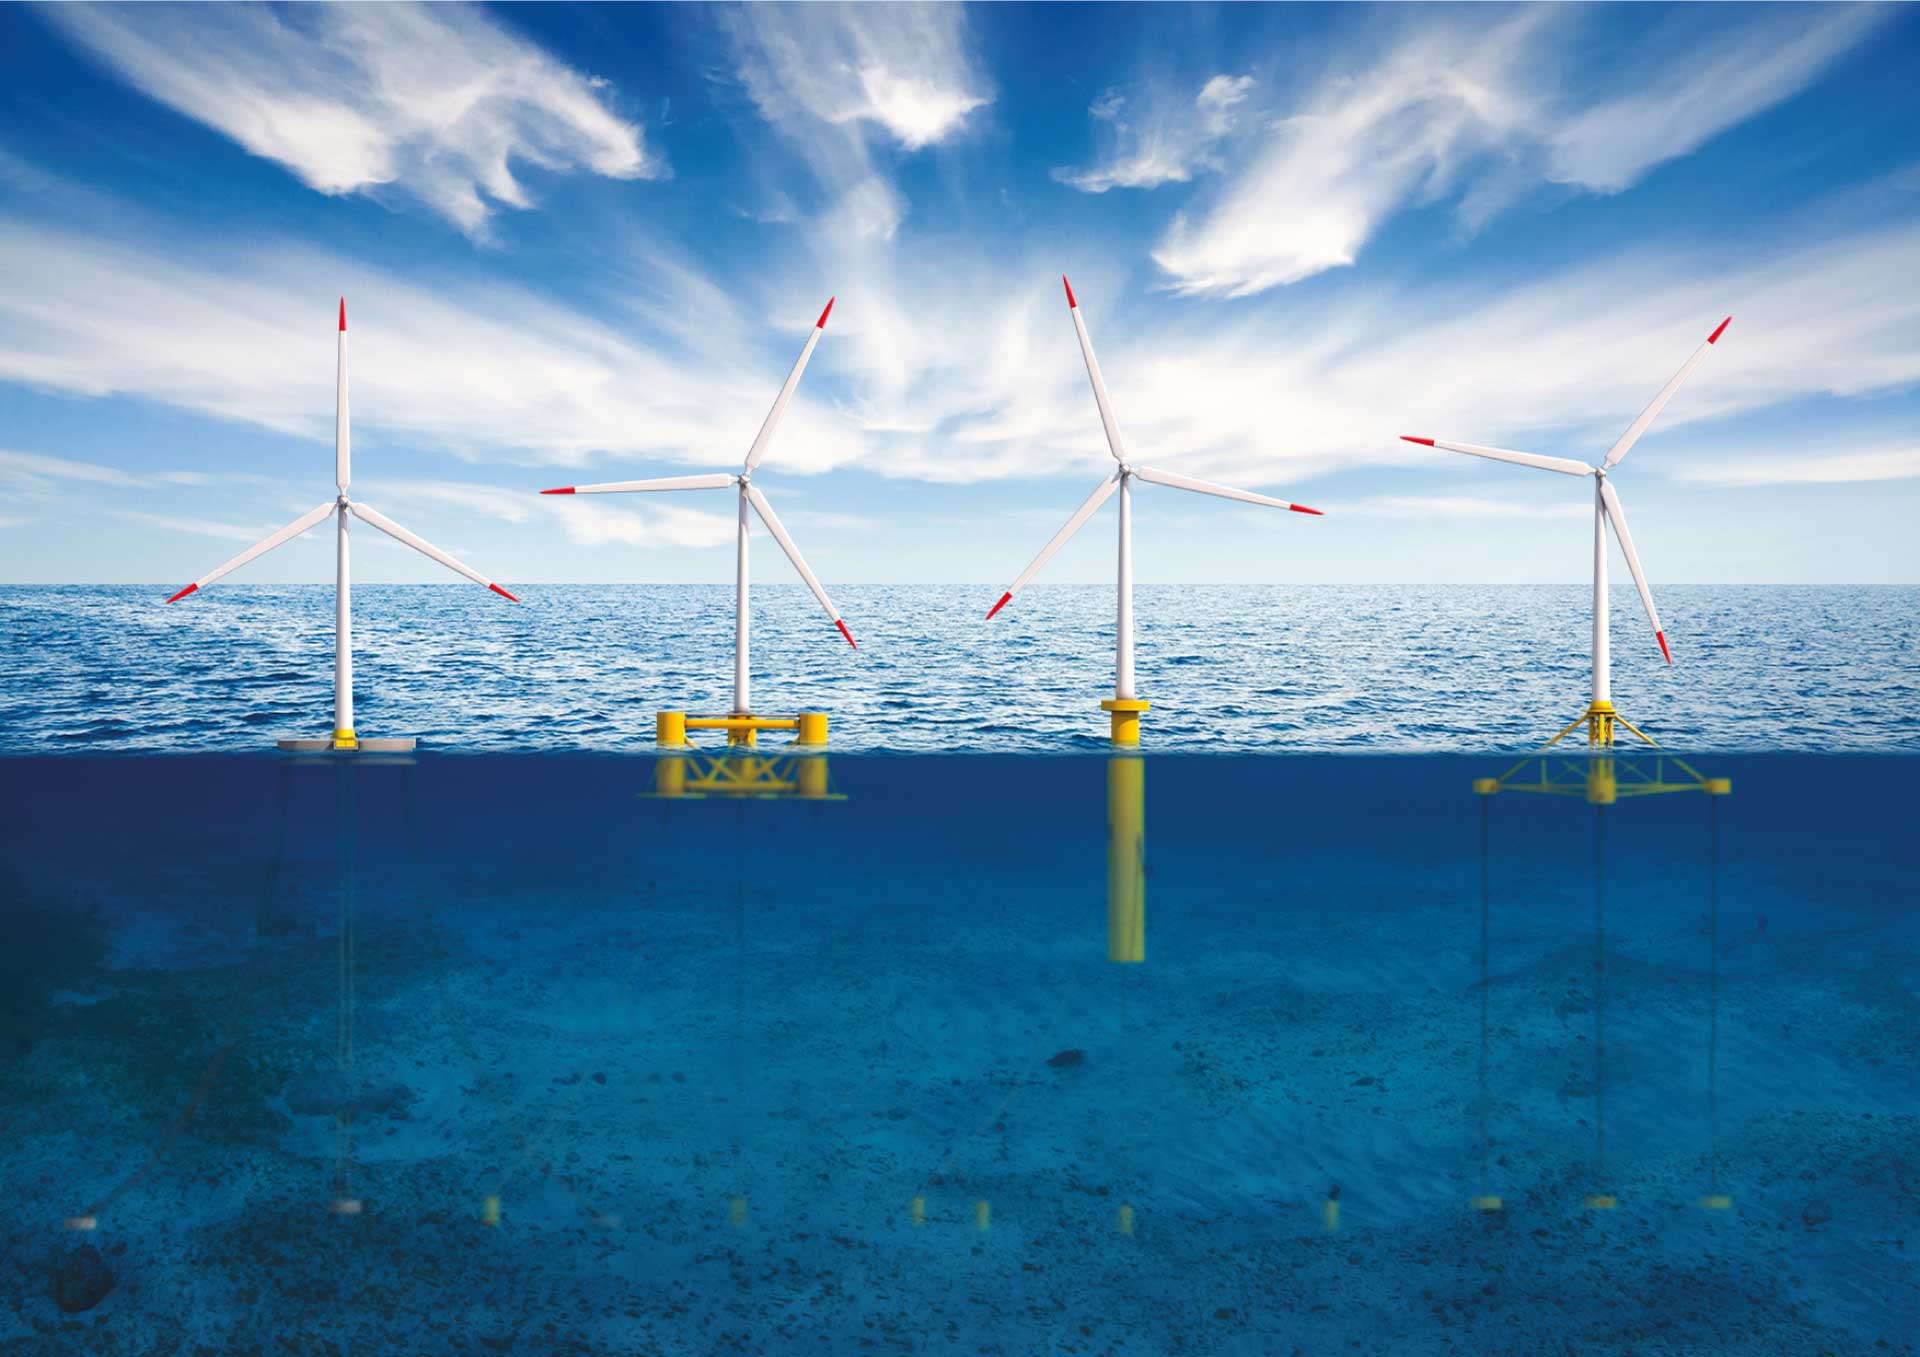 The role of the Naval Architect in Floating Offshore Wind